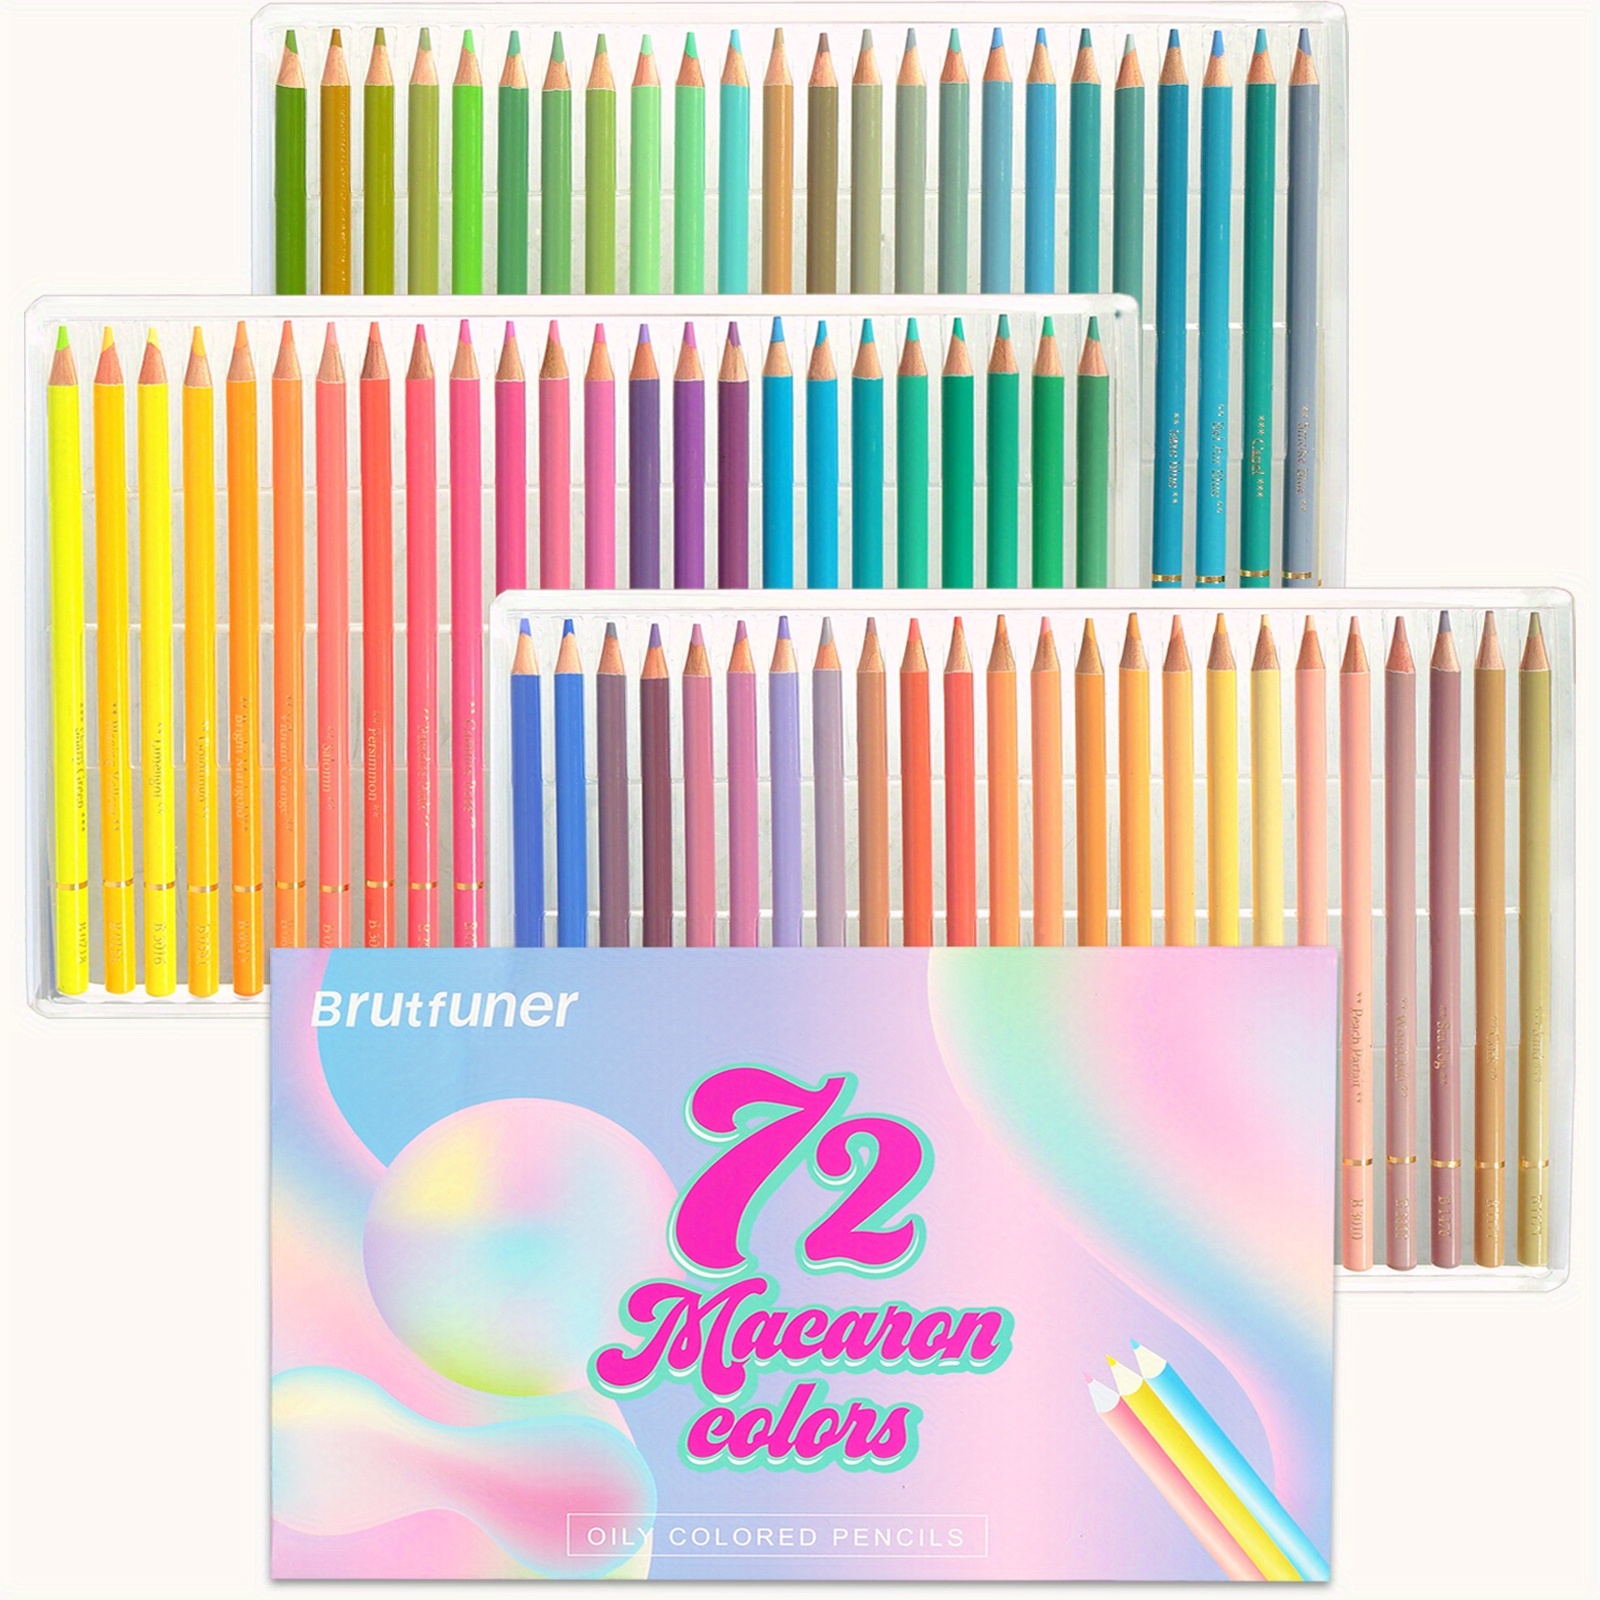 LBW 72 Macaron Pastel Colored Pencils Set Soft Core Macaron Colors for  Adults Coloring Books Kids Beginners Blending Shading Sketching